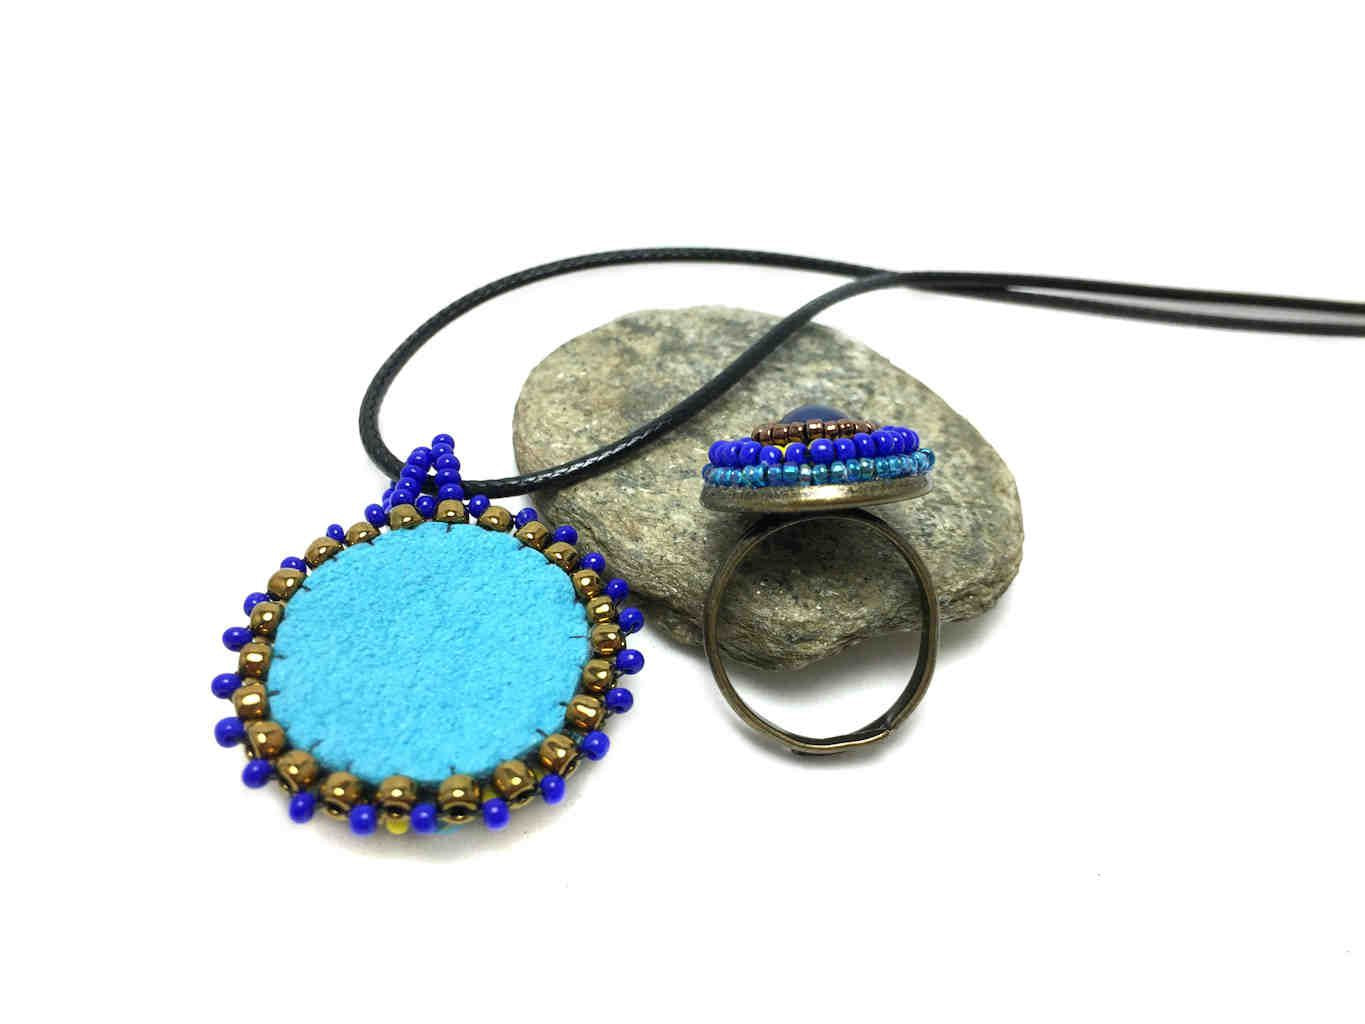 Mandala pendant and ring set in blue and yellow sun saluation